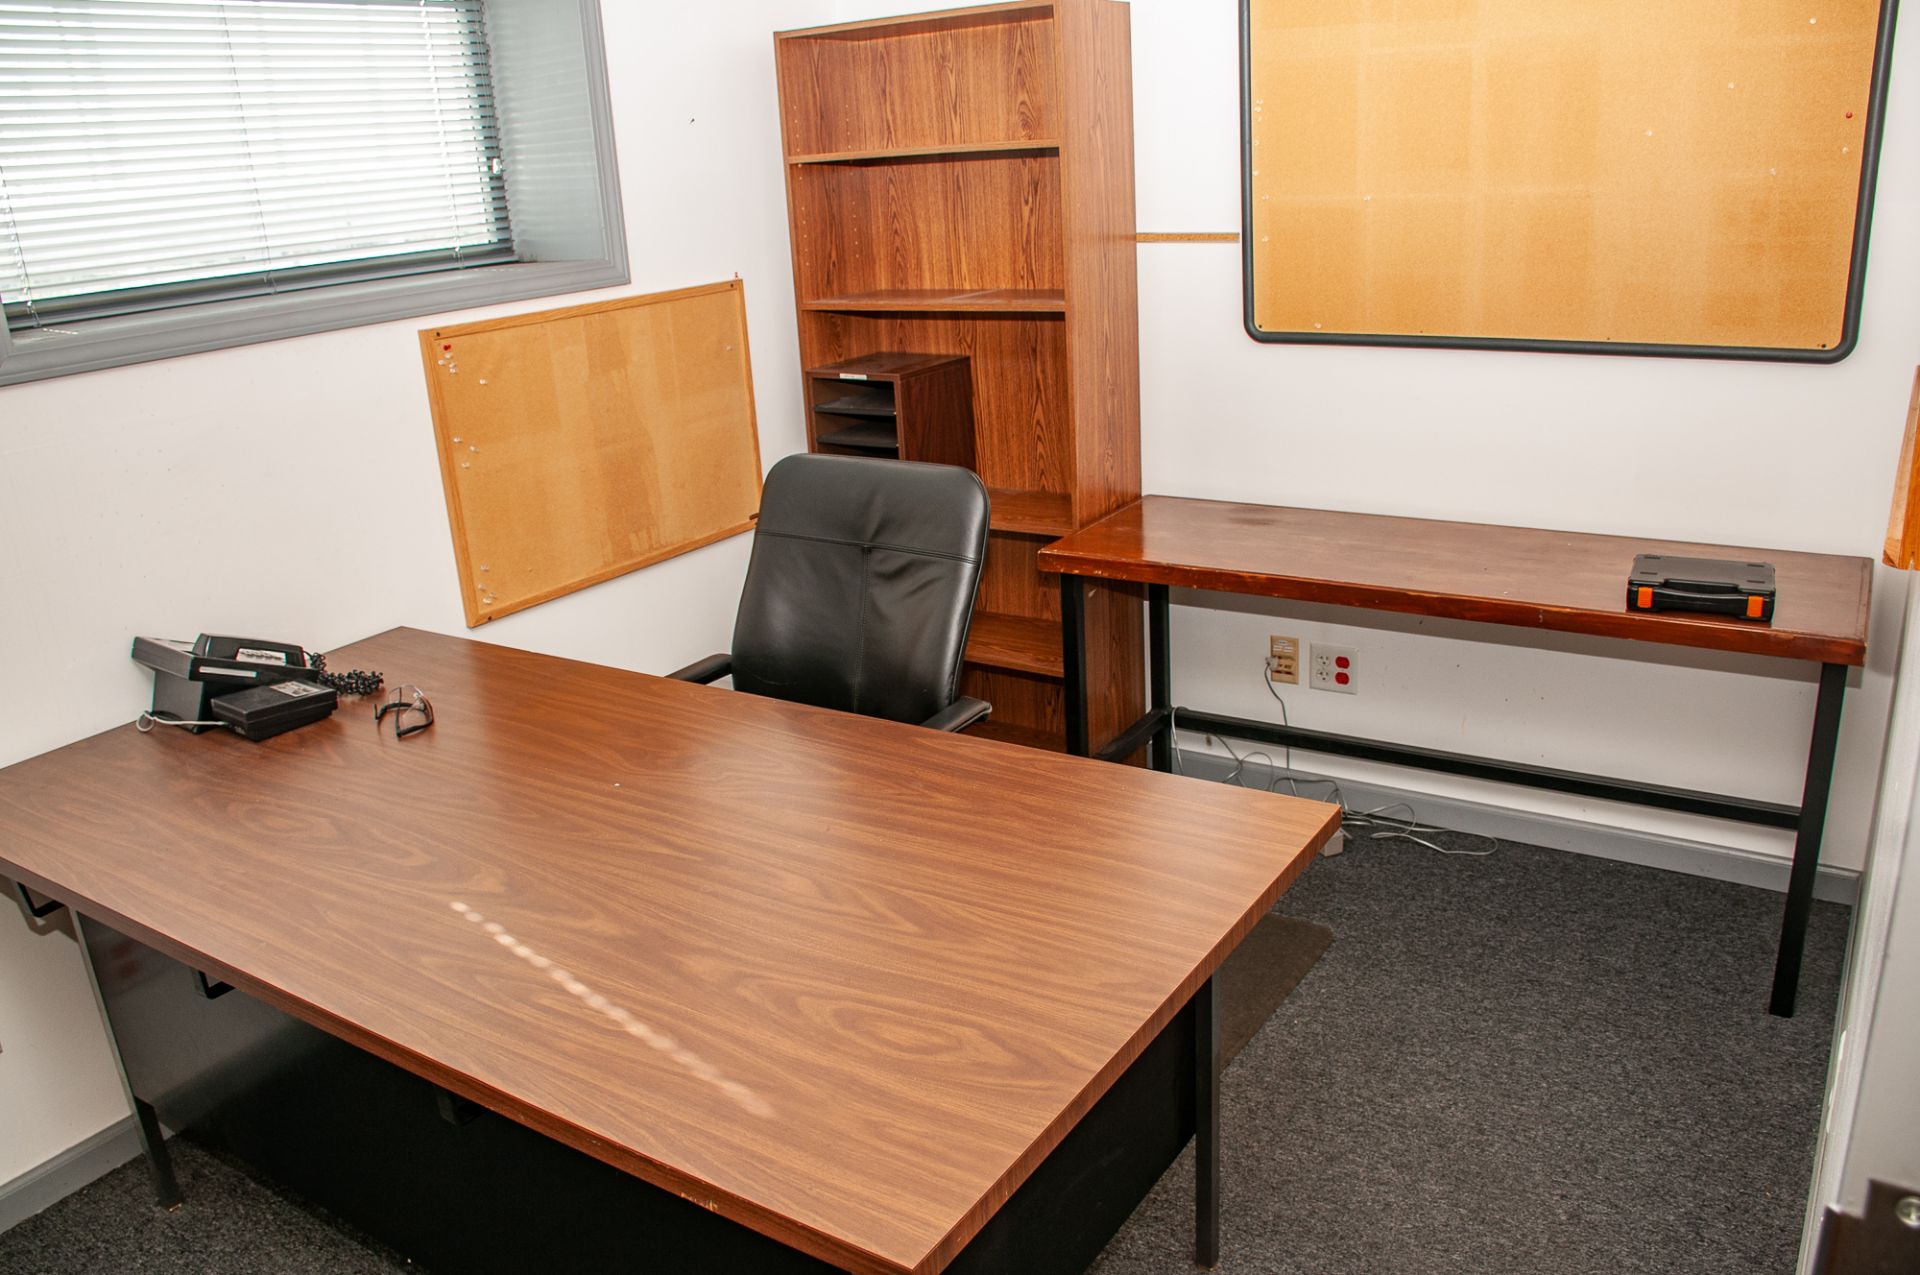 Office Furniture On Second Floor Front of Building, Microwave, Refridgerator, Desks Chairs, Filing C - Image 9 of 37